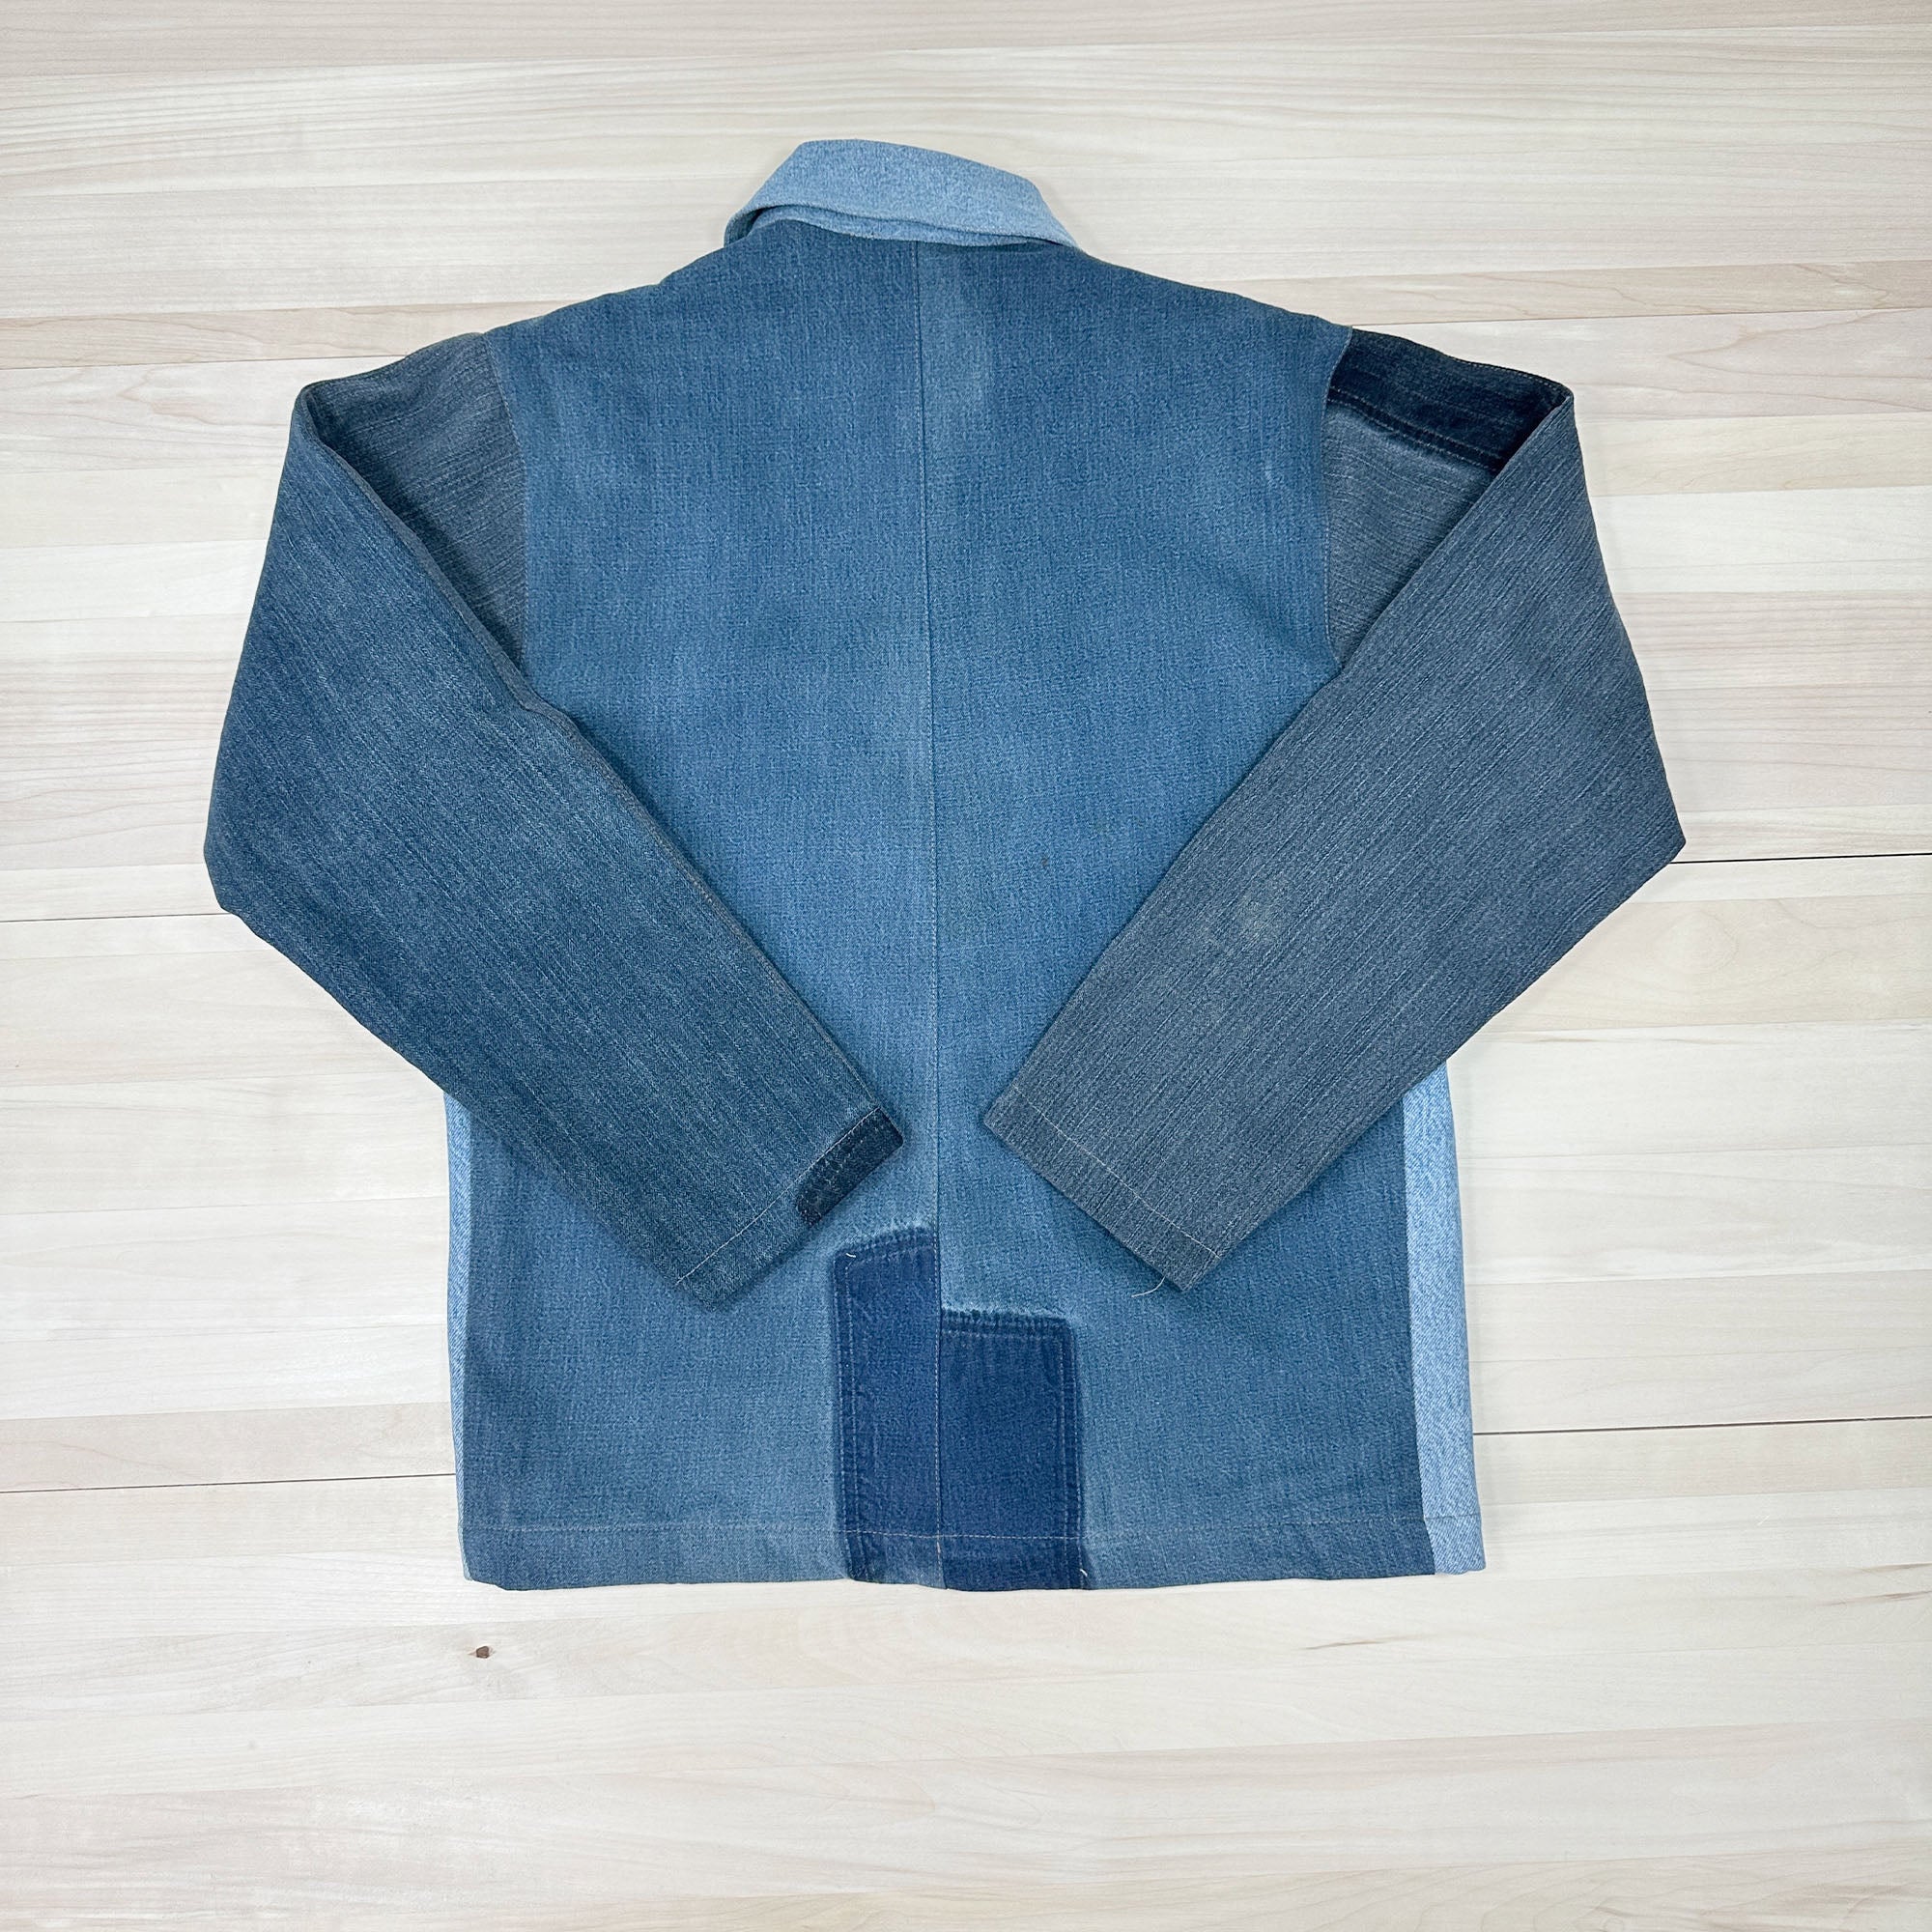 Chore Coat Made From Recycled Dickies Work Jeans - Small / Medium